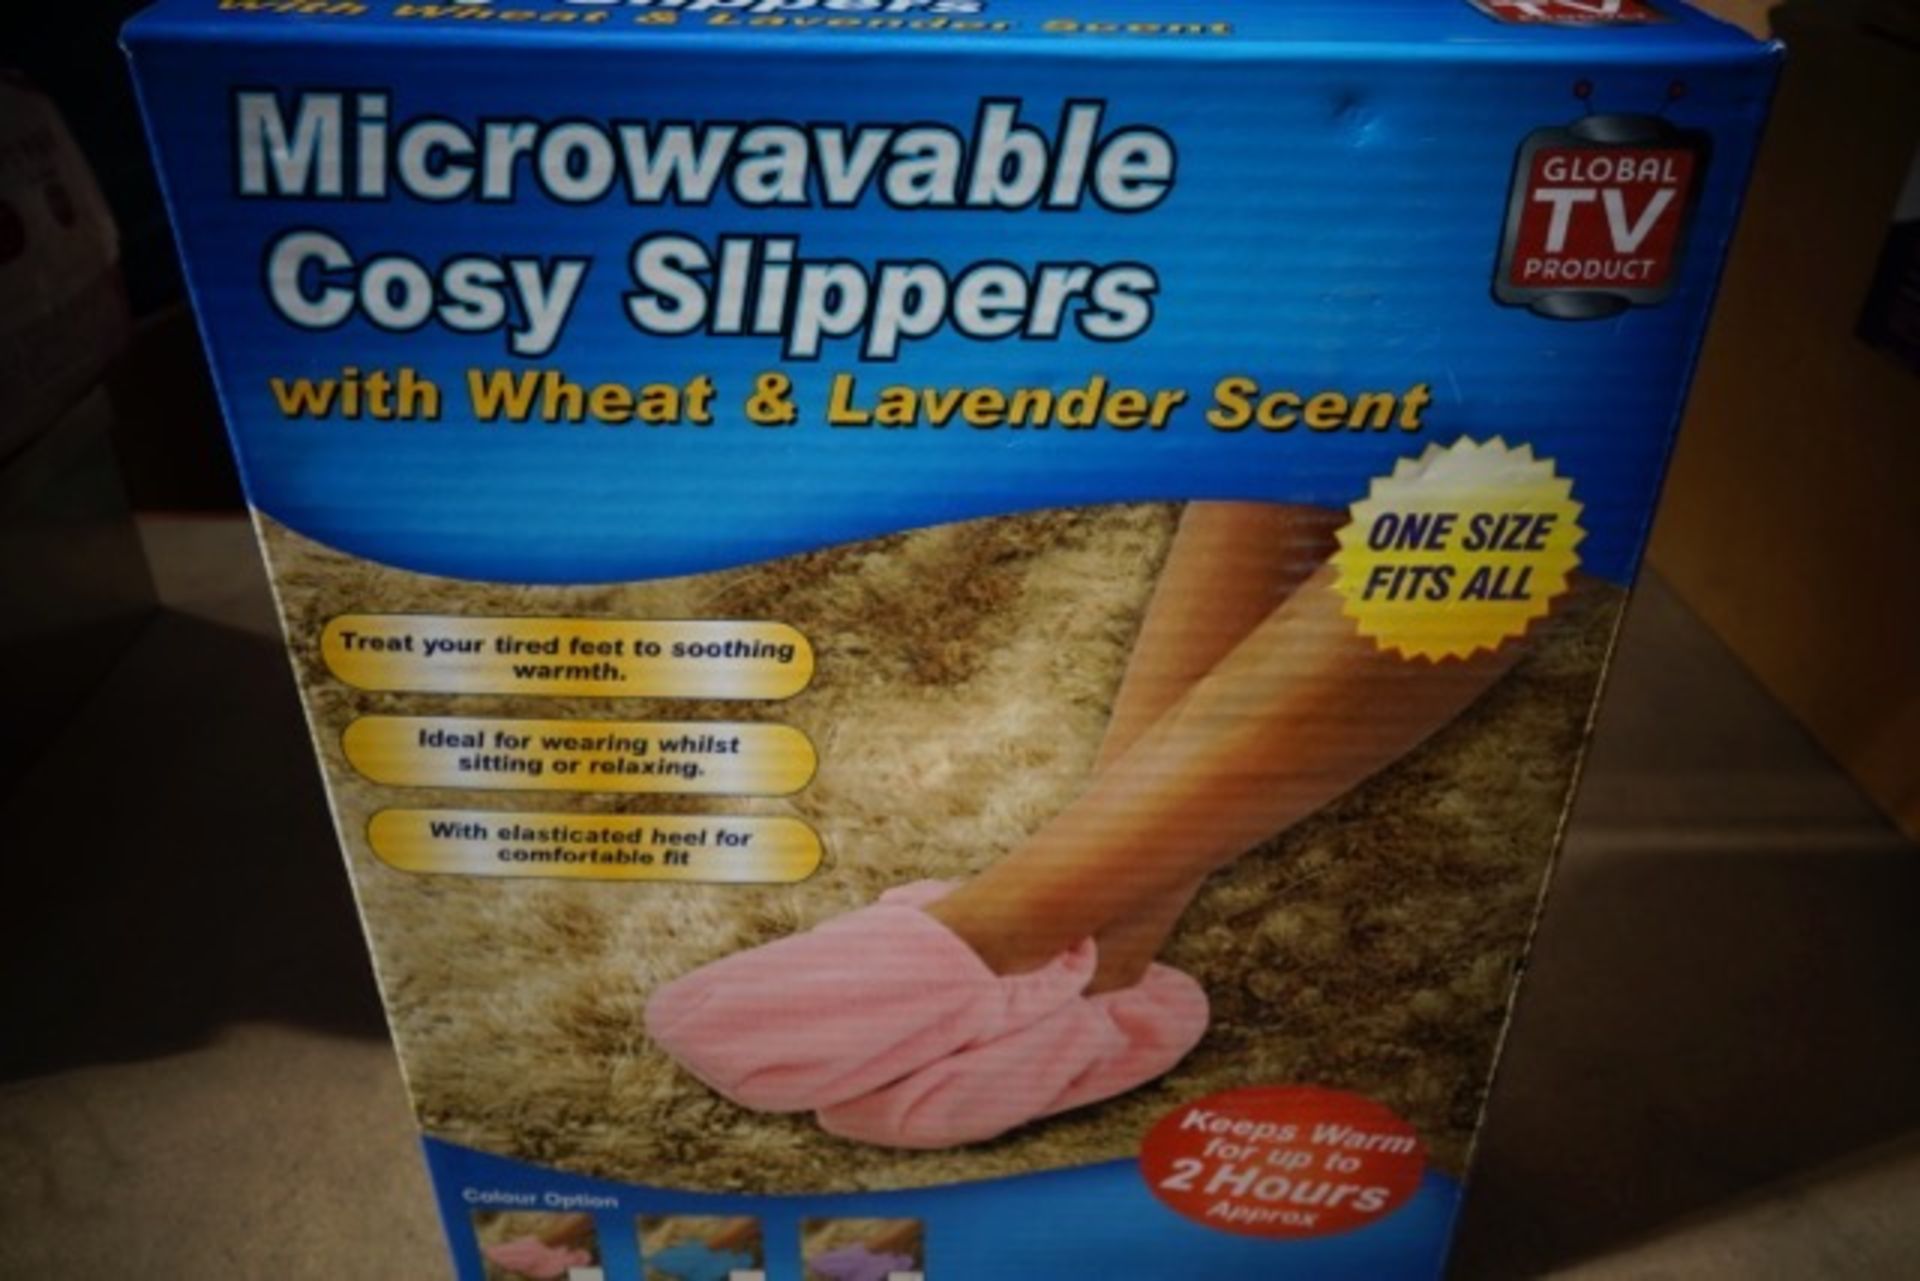 36 x Brand New Microwavable Cosy Slippers with Wheat & Lavender Scent - Image 2 of 2